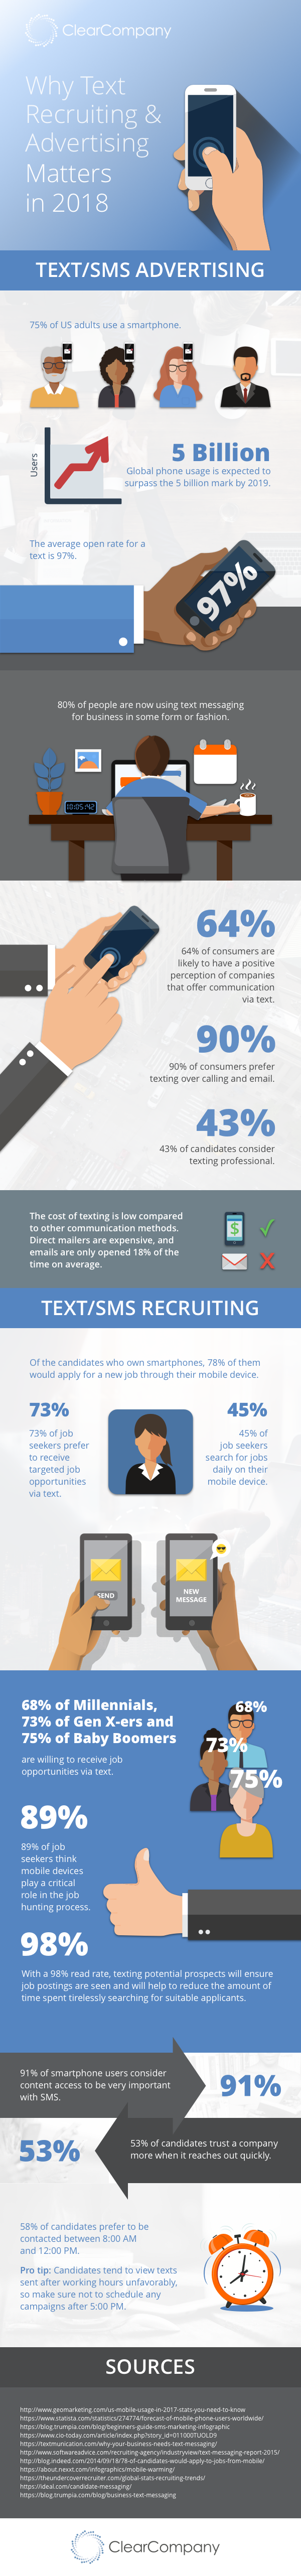 ClearCompany-text-infographic-FINAL